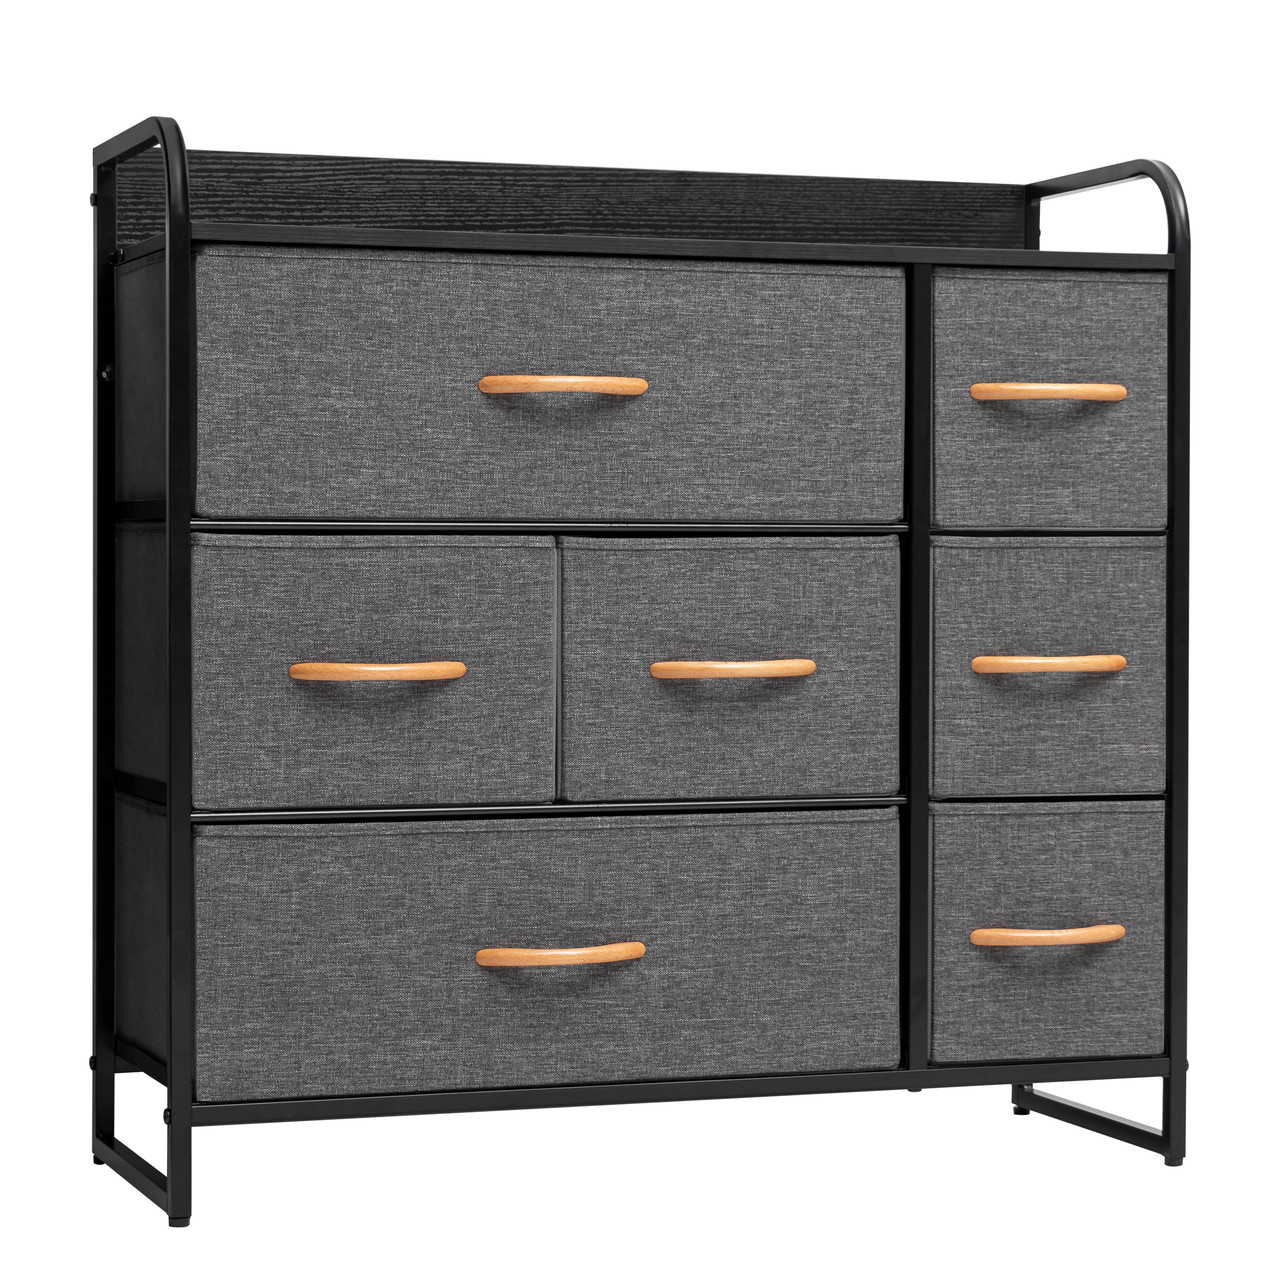 Buy Crestlive Products 7-Drawers Wide Vertical Dresser Storage Tower with  Wood Shelf Handle at the best price of 84.99